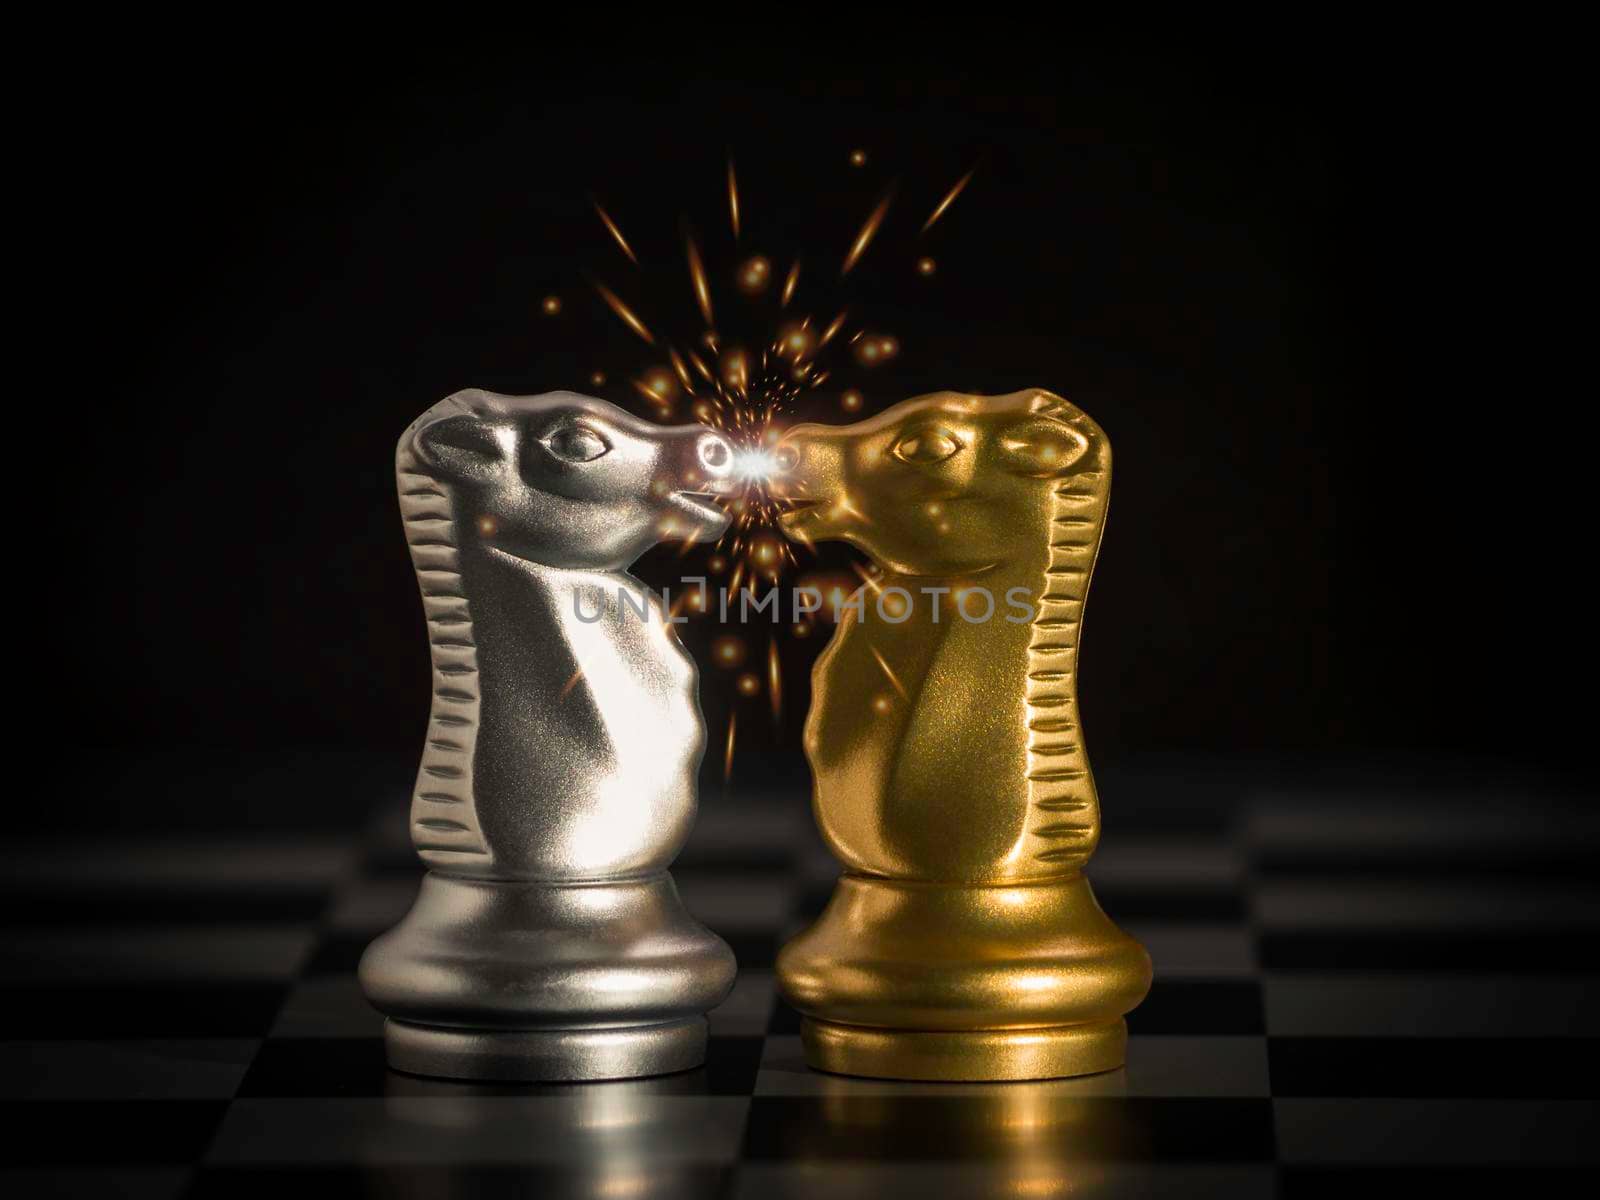 Gold knight chess facing silver knight chess with red hot flying sparks fire on chess board. Business leader market target strategy. business competition success, strategy ideas. by Chakreeyarut